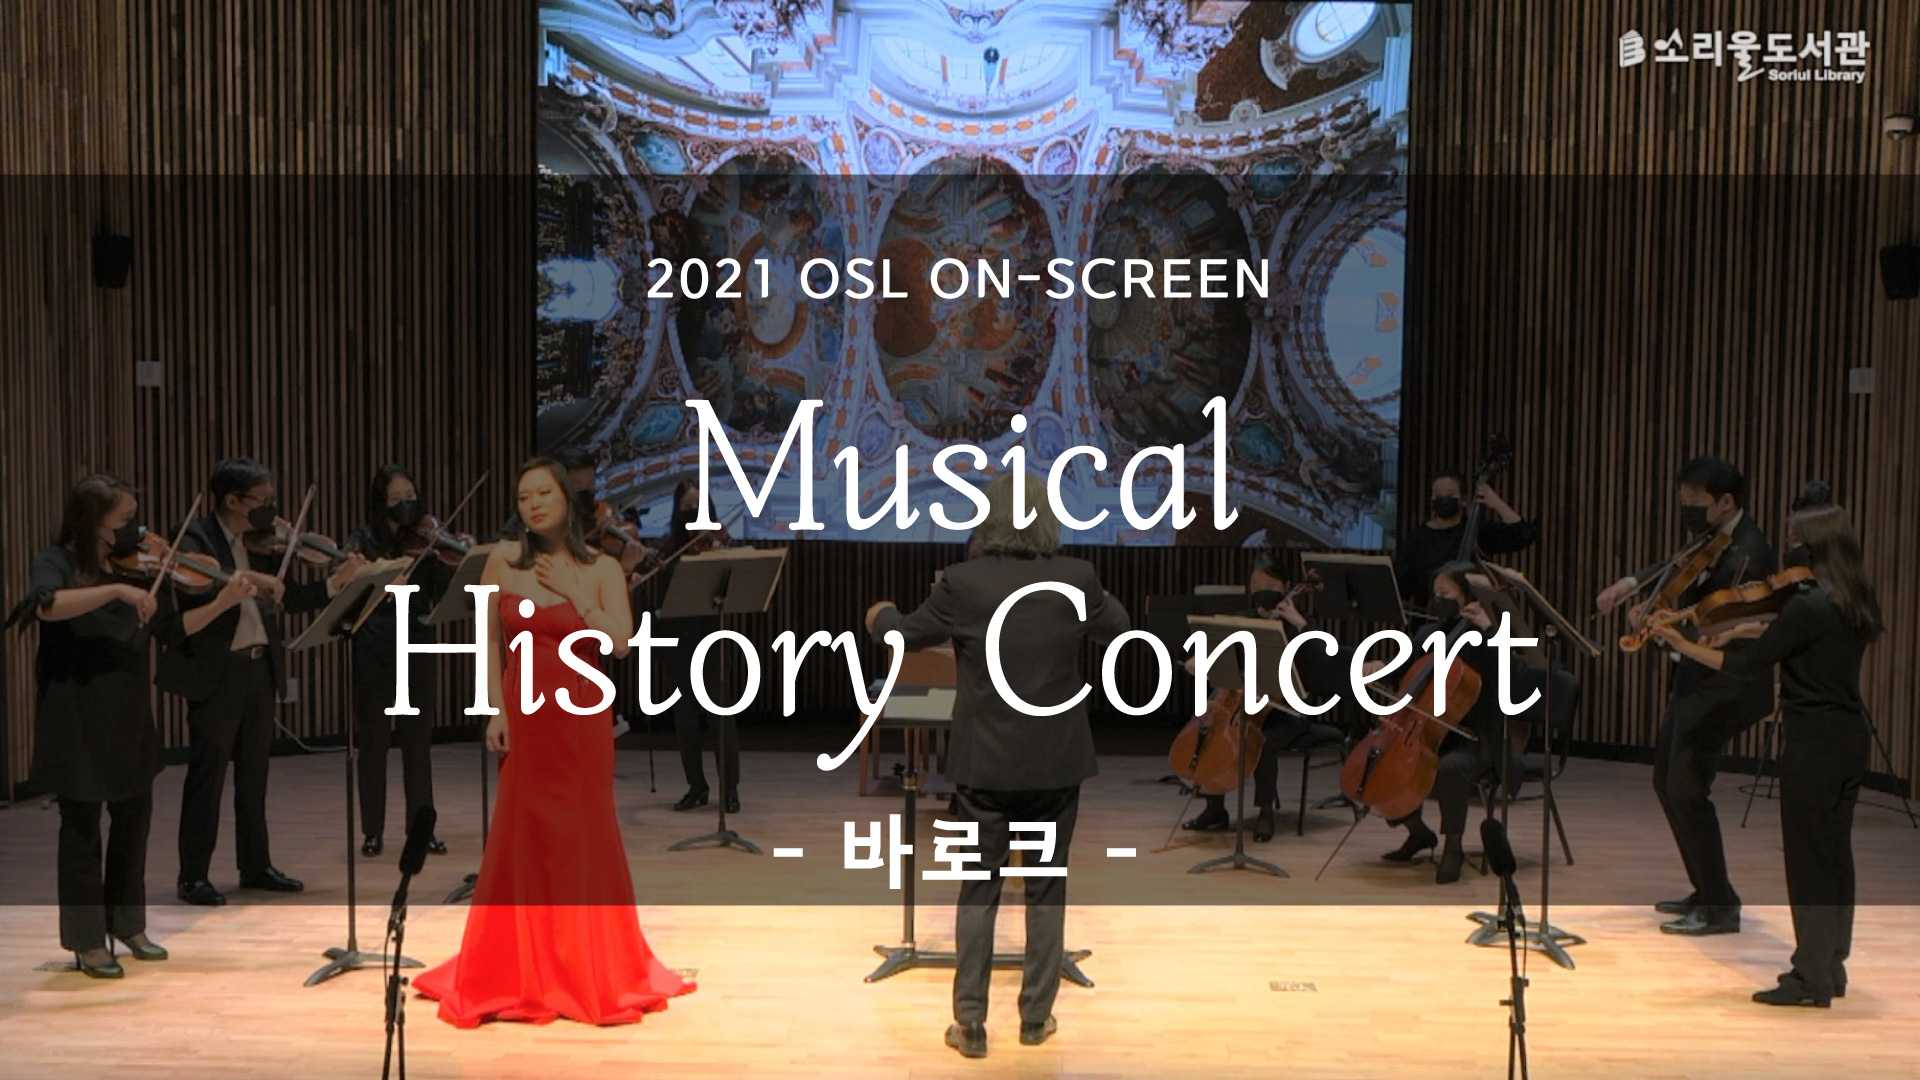 2021-2 Musical History Concert - Baroque